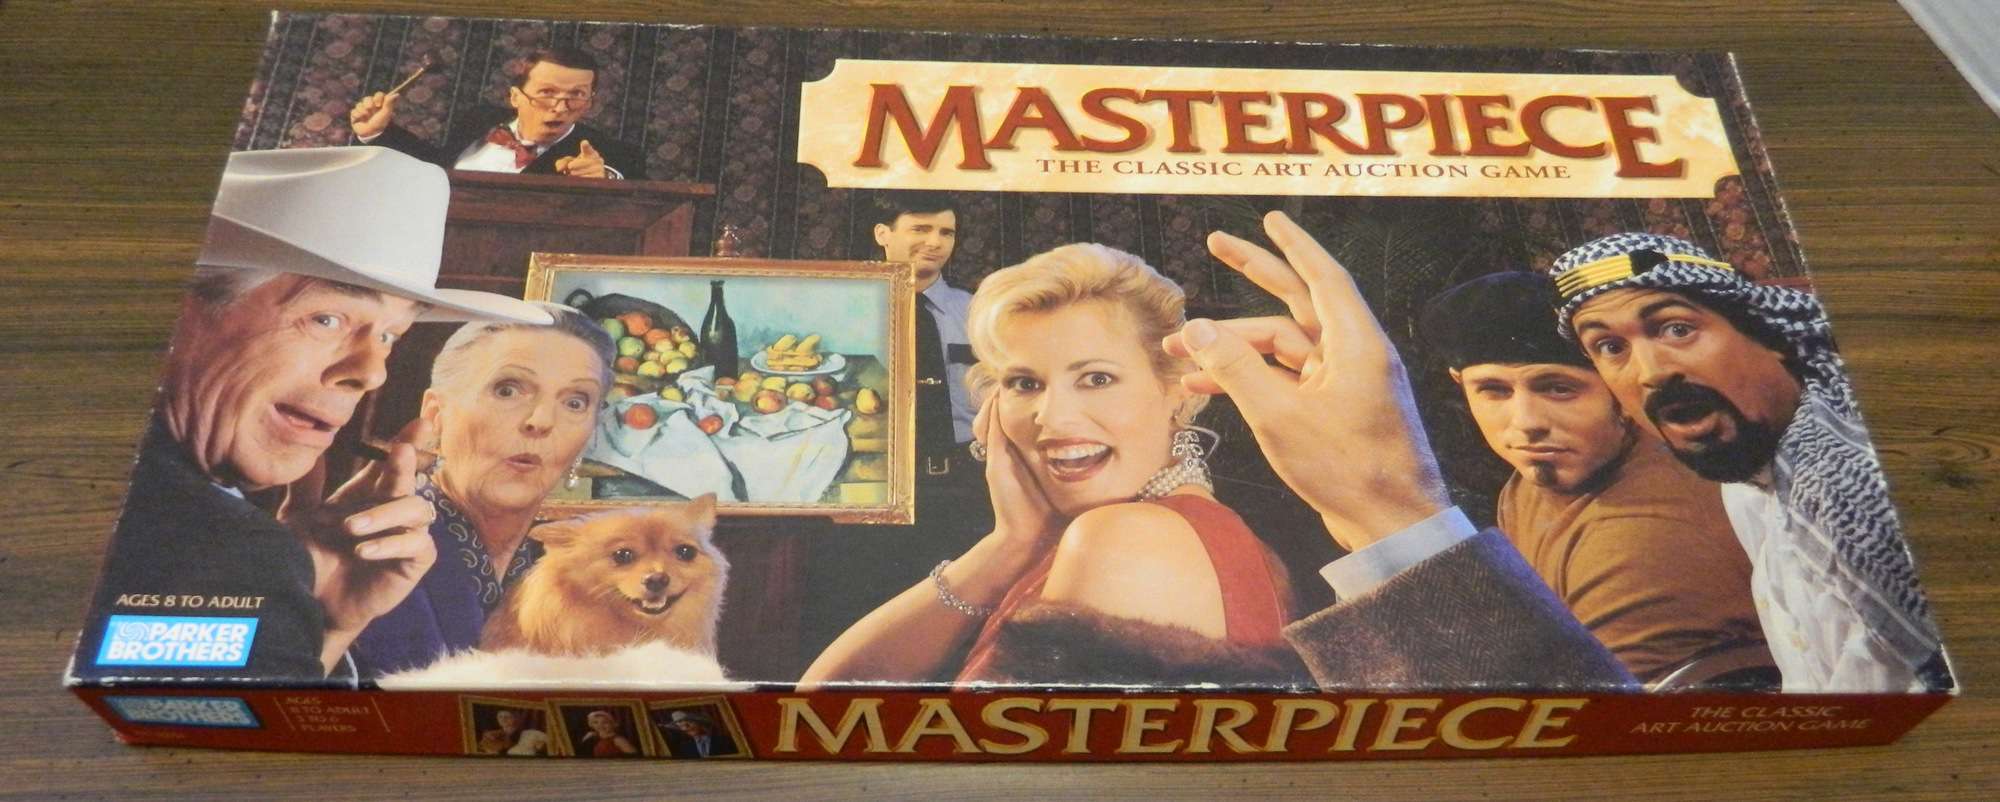 MASTERPIECE ~AUCTION GAME 1970 ~ CHARACTER CARDS COMBINED POSTAGE/SELECT 